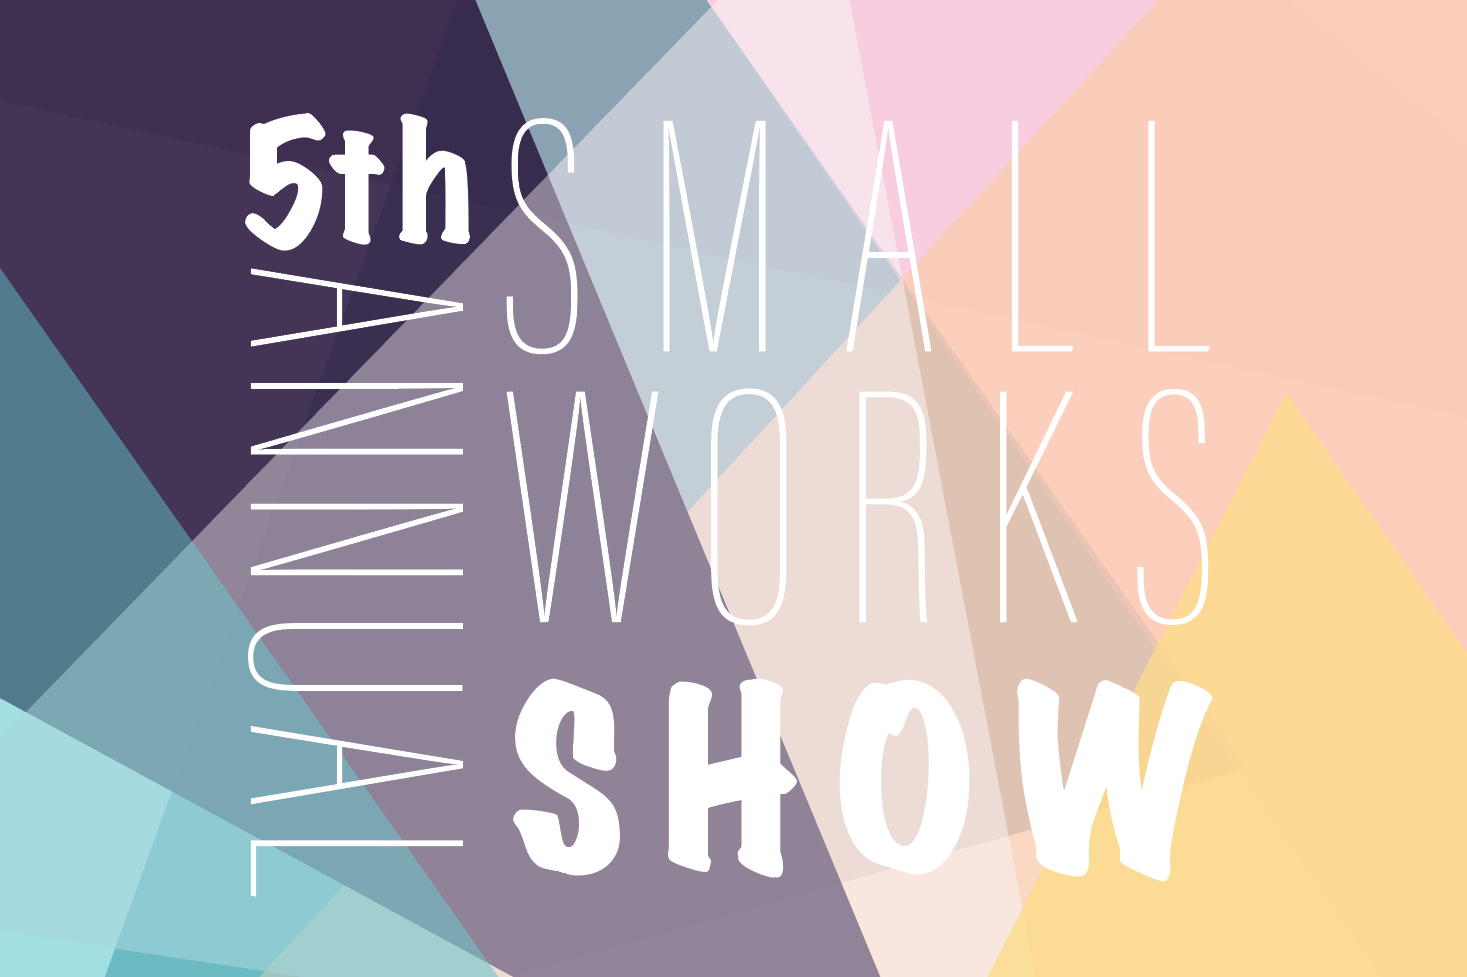 5th Annual Small Works Show Call for Entry